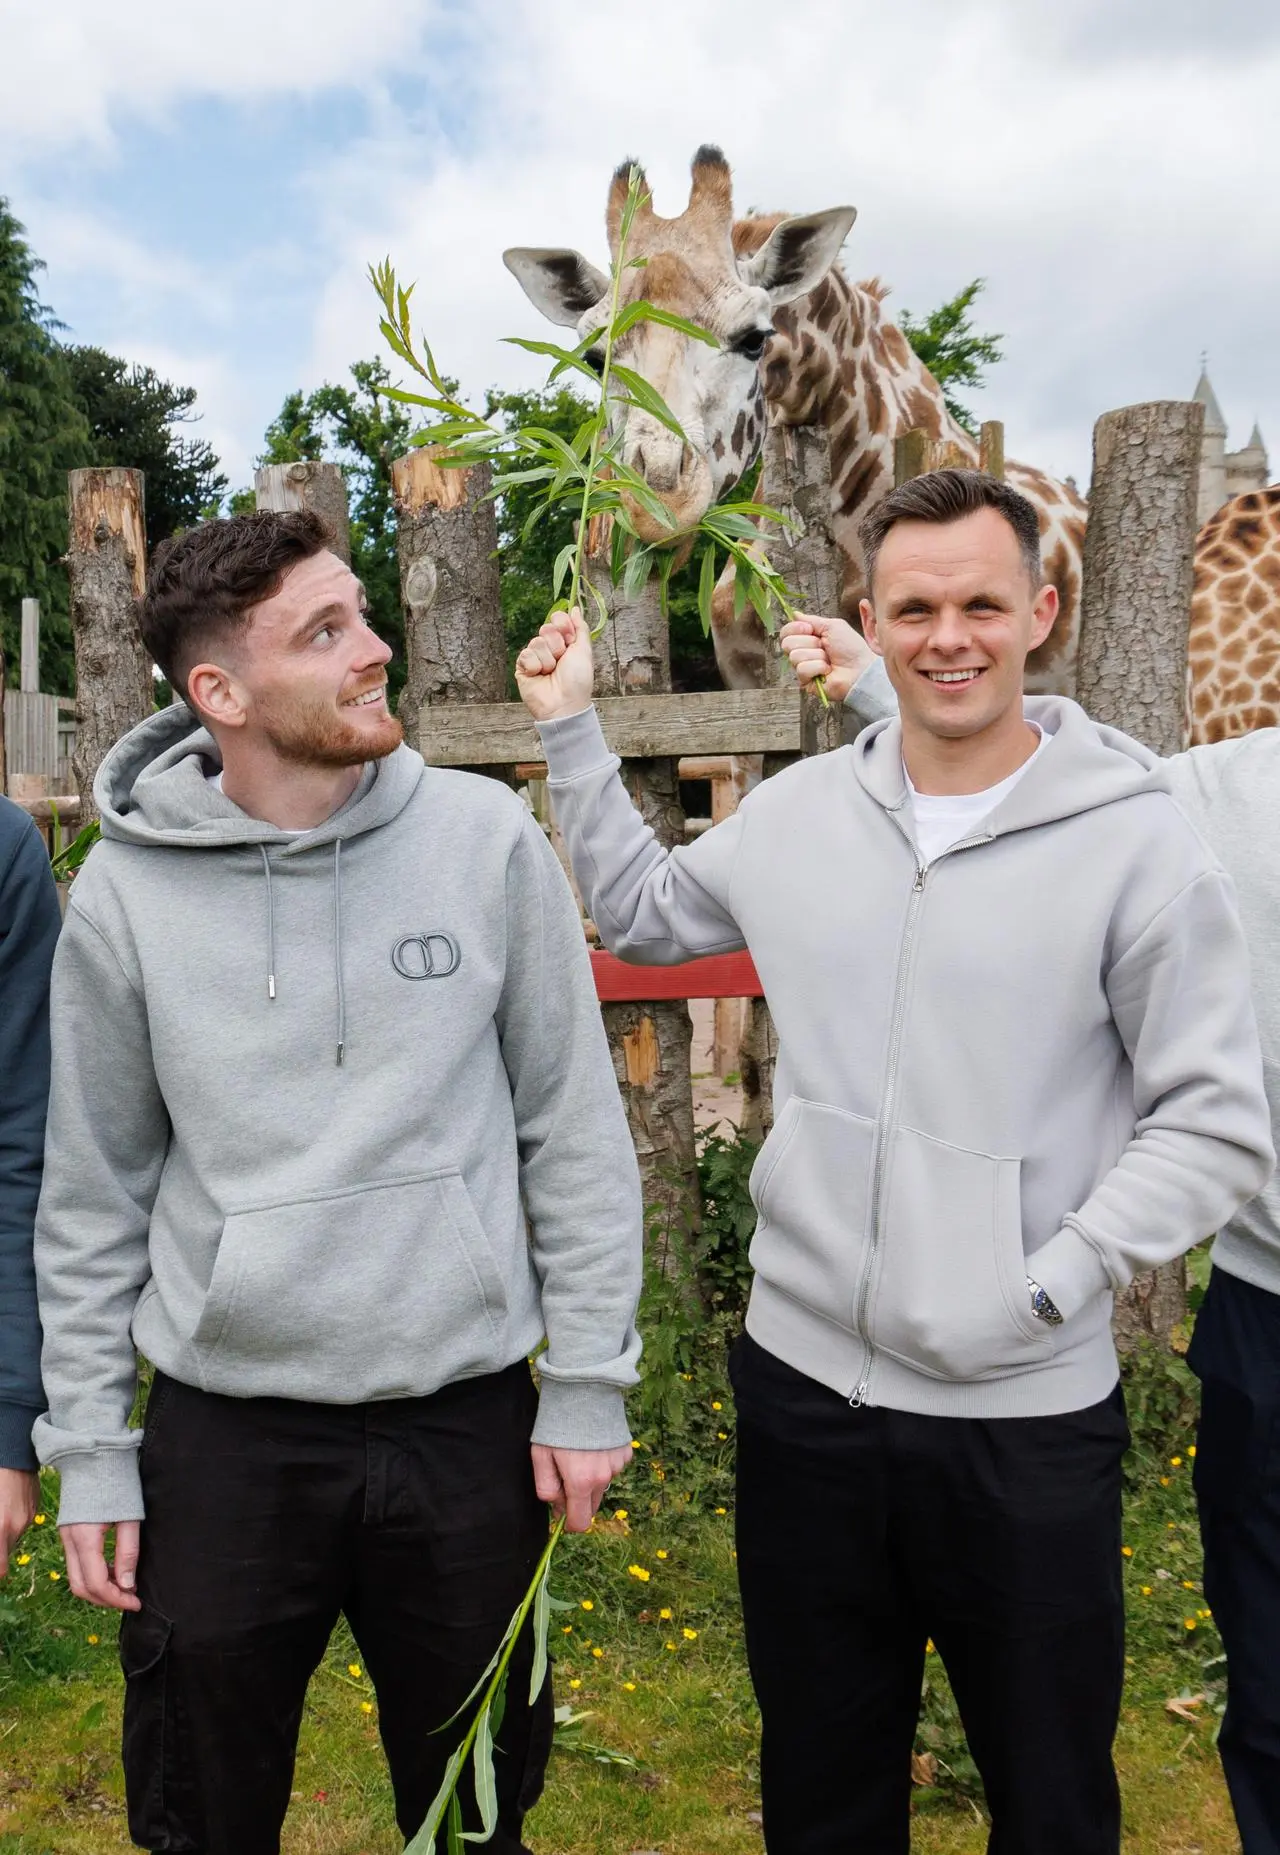 Andy Robertson, Lawrence Shankland and a giraffe